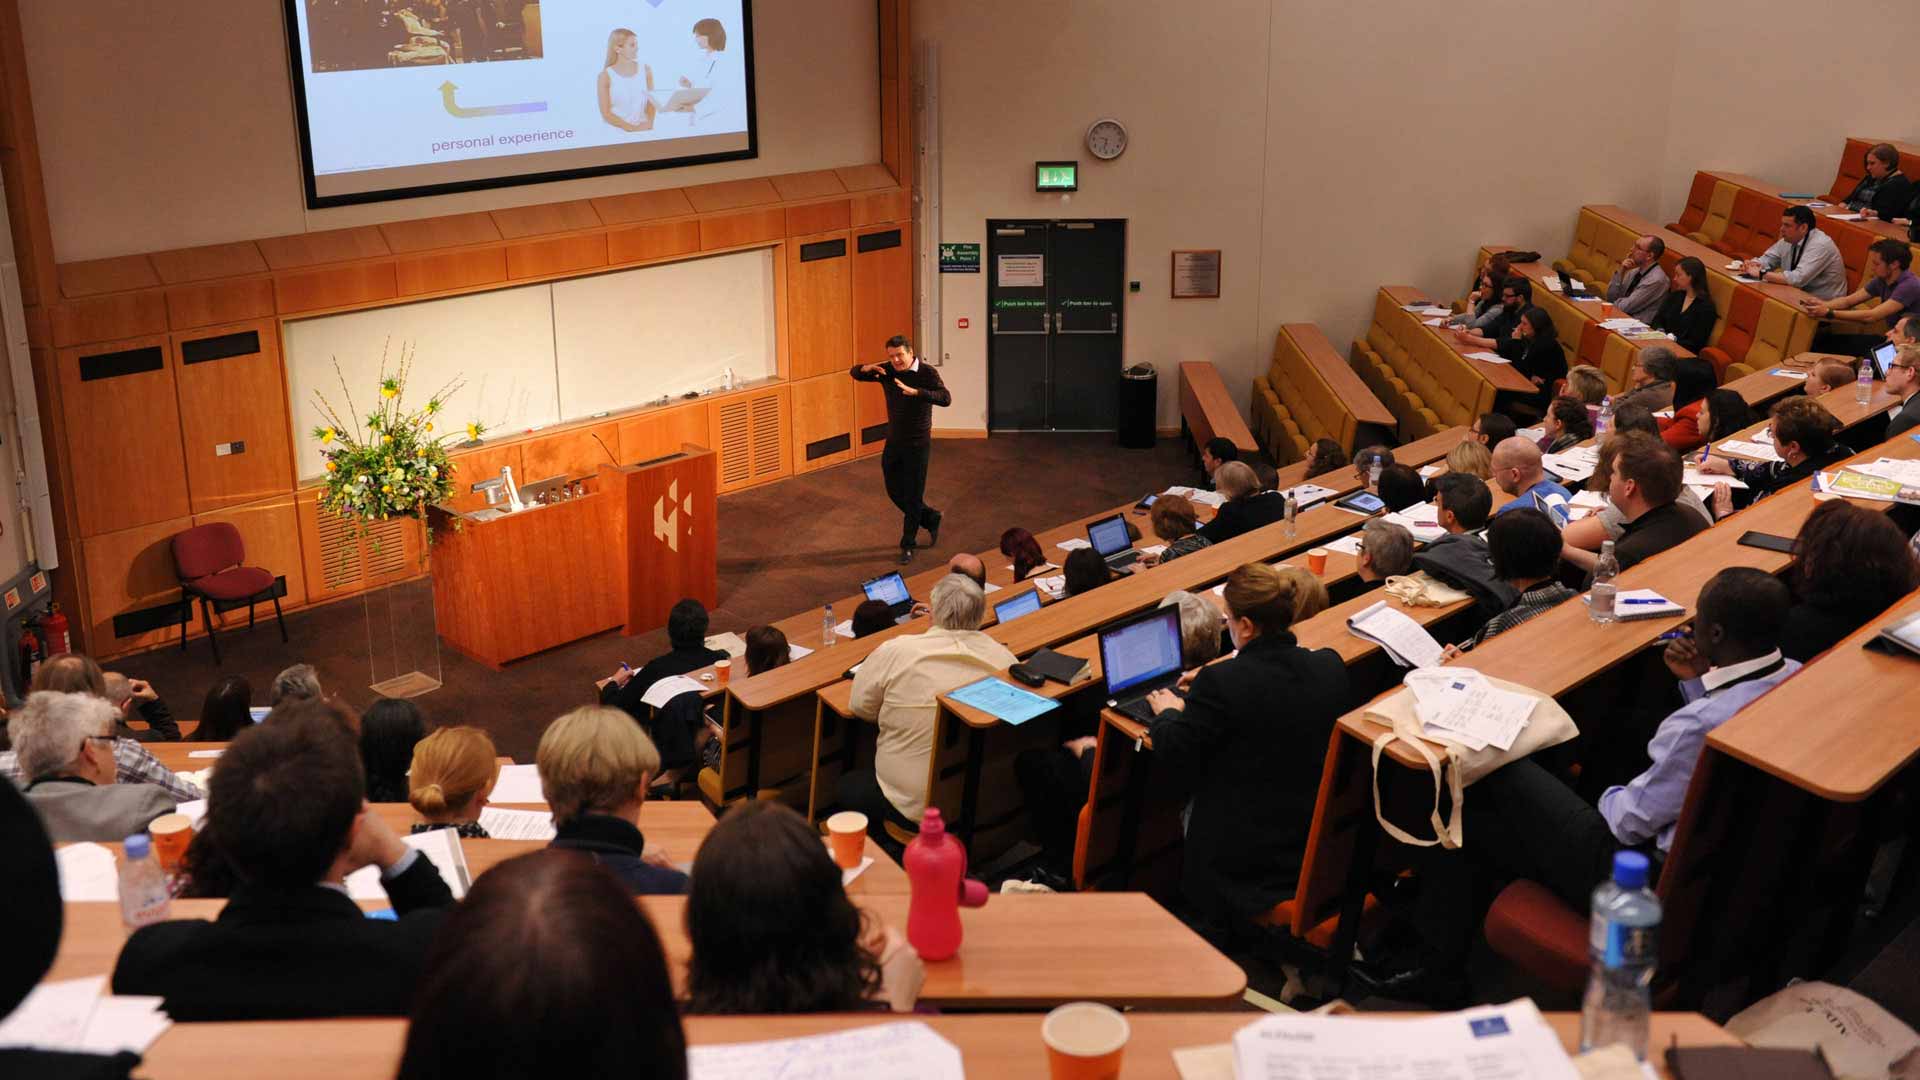 Many students receiving a lecture from a member of staff in a brown and cream lecture hall.